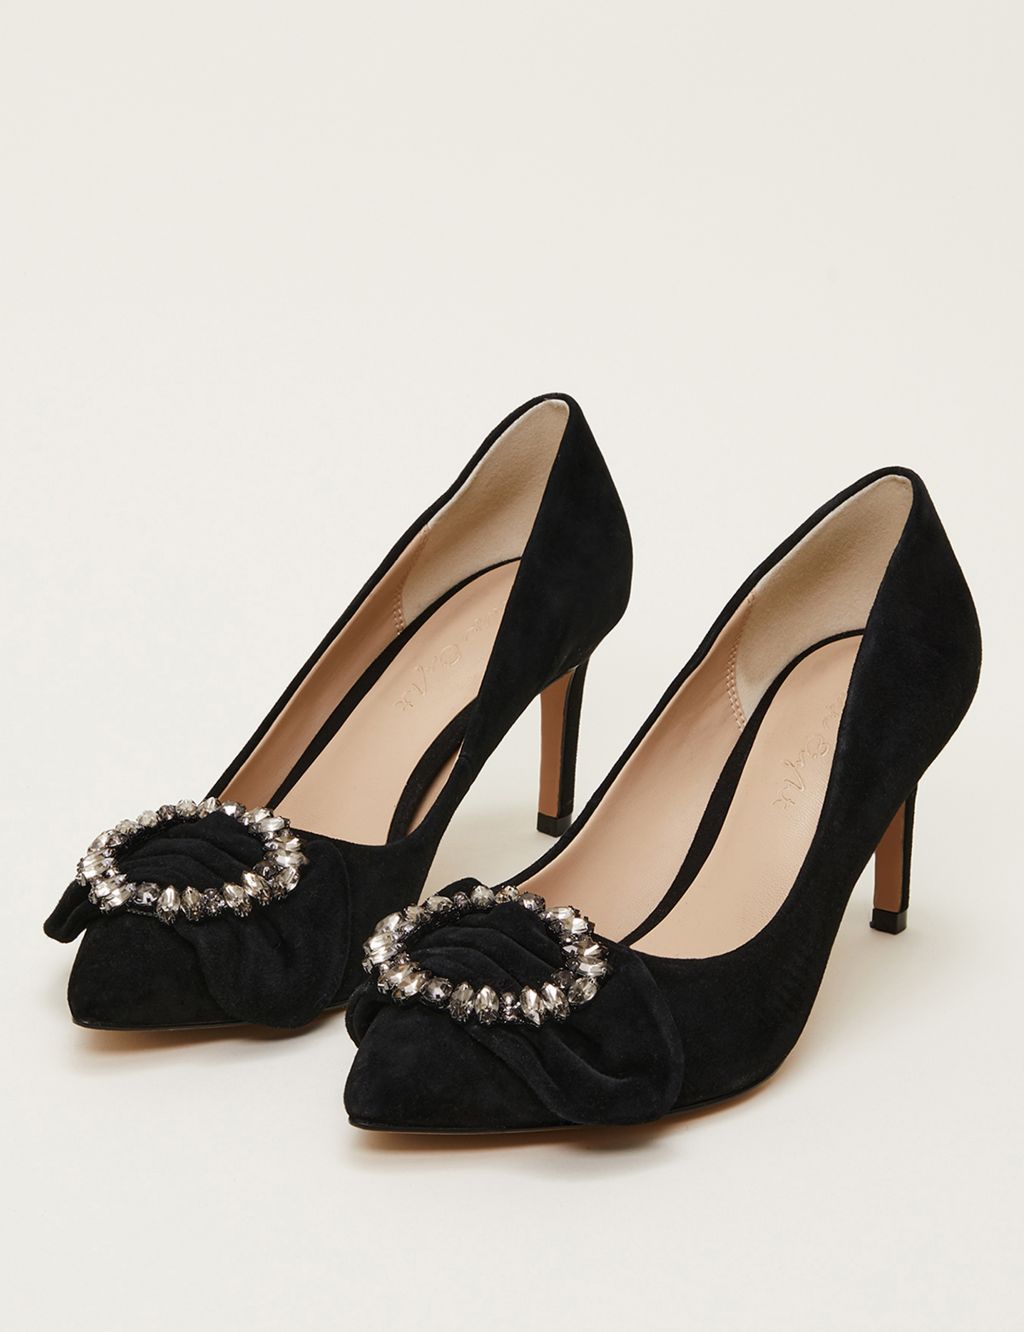 Suede Bow Stiletto Pointed Court Shoes image 2